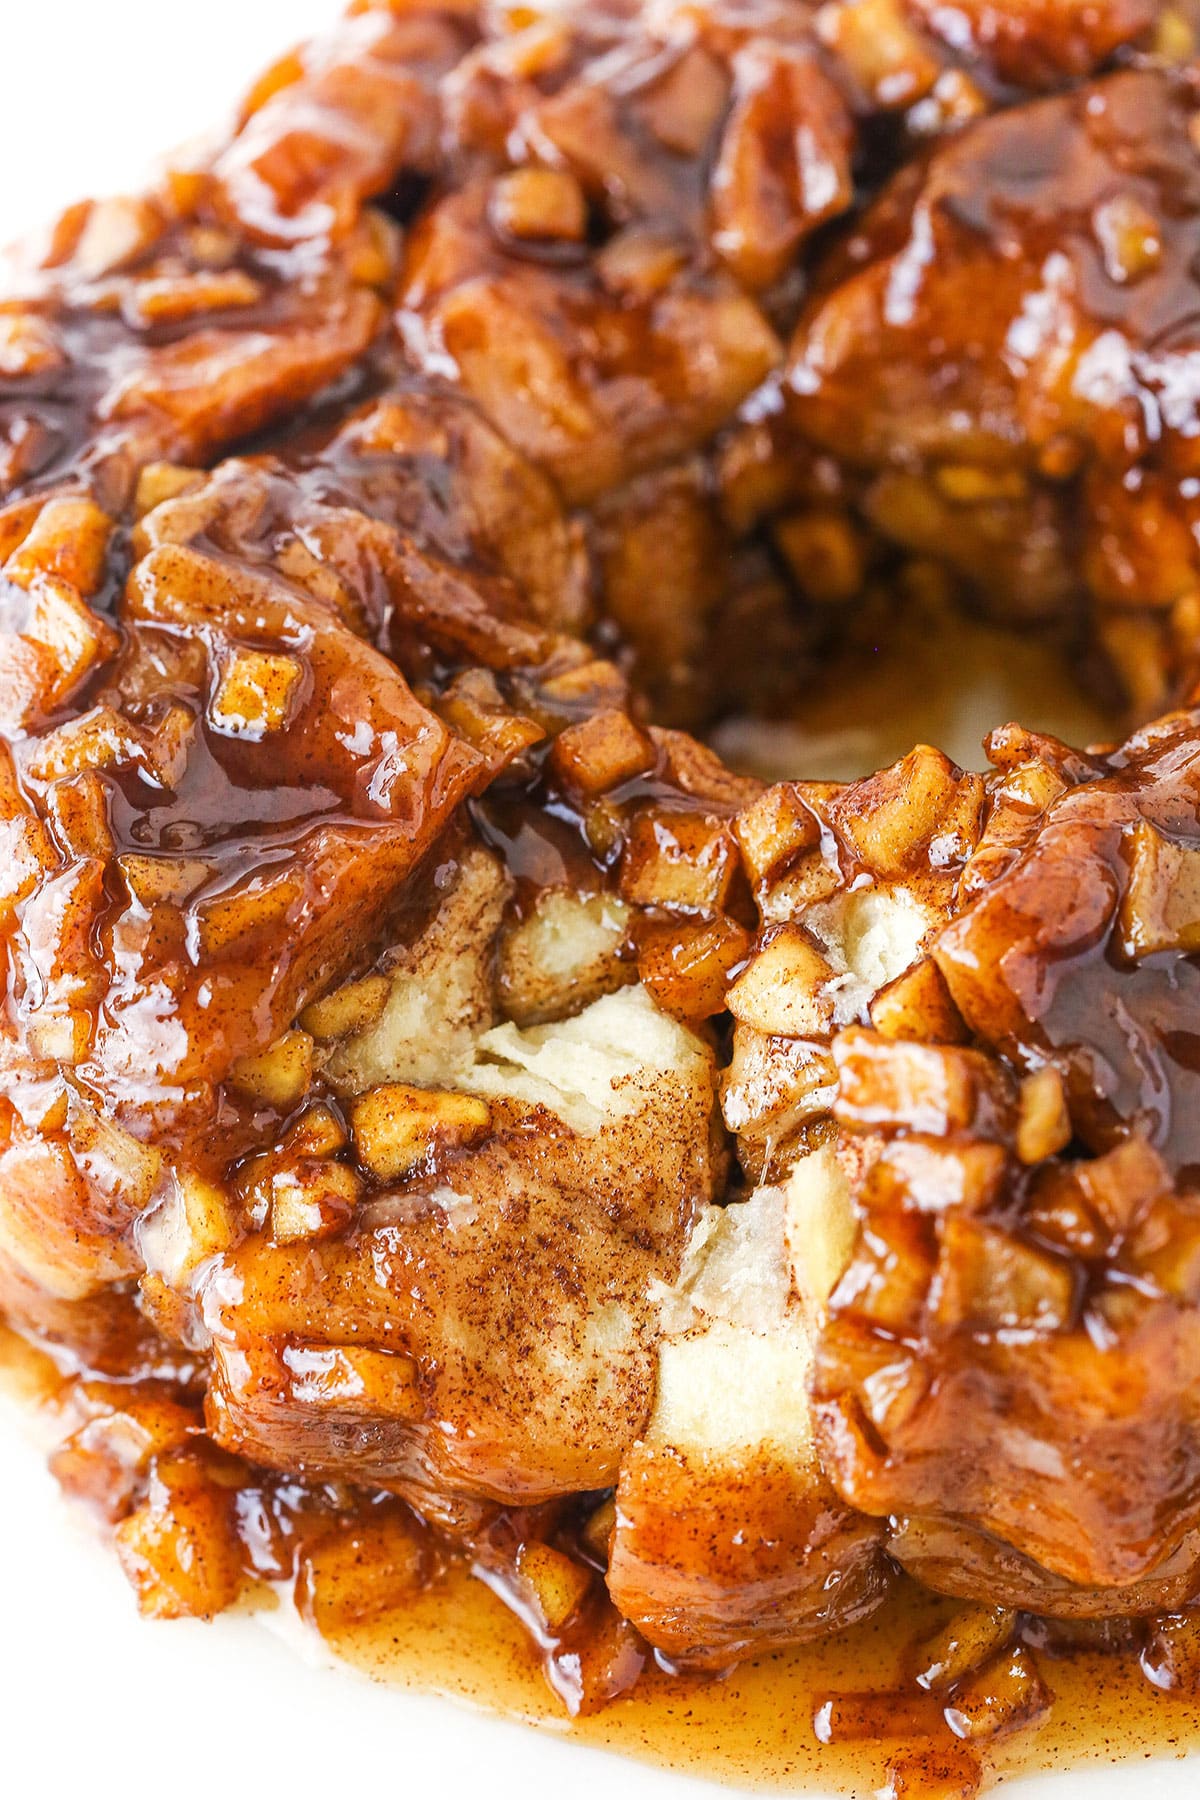 Overhead view of Apple Fritter Monkey Bread with a few pieces removed showing bread texture on a white cake stand